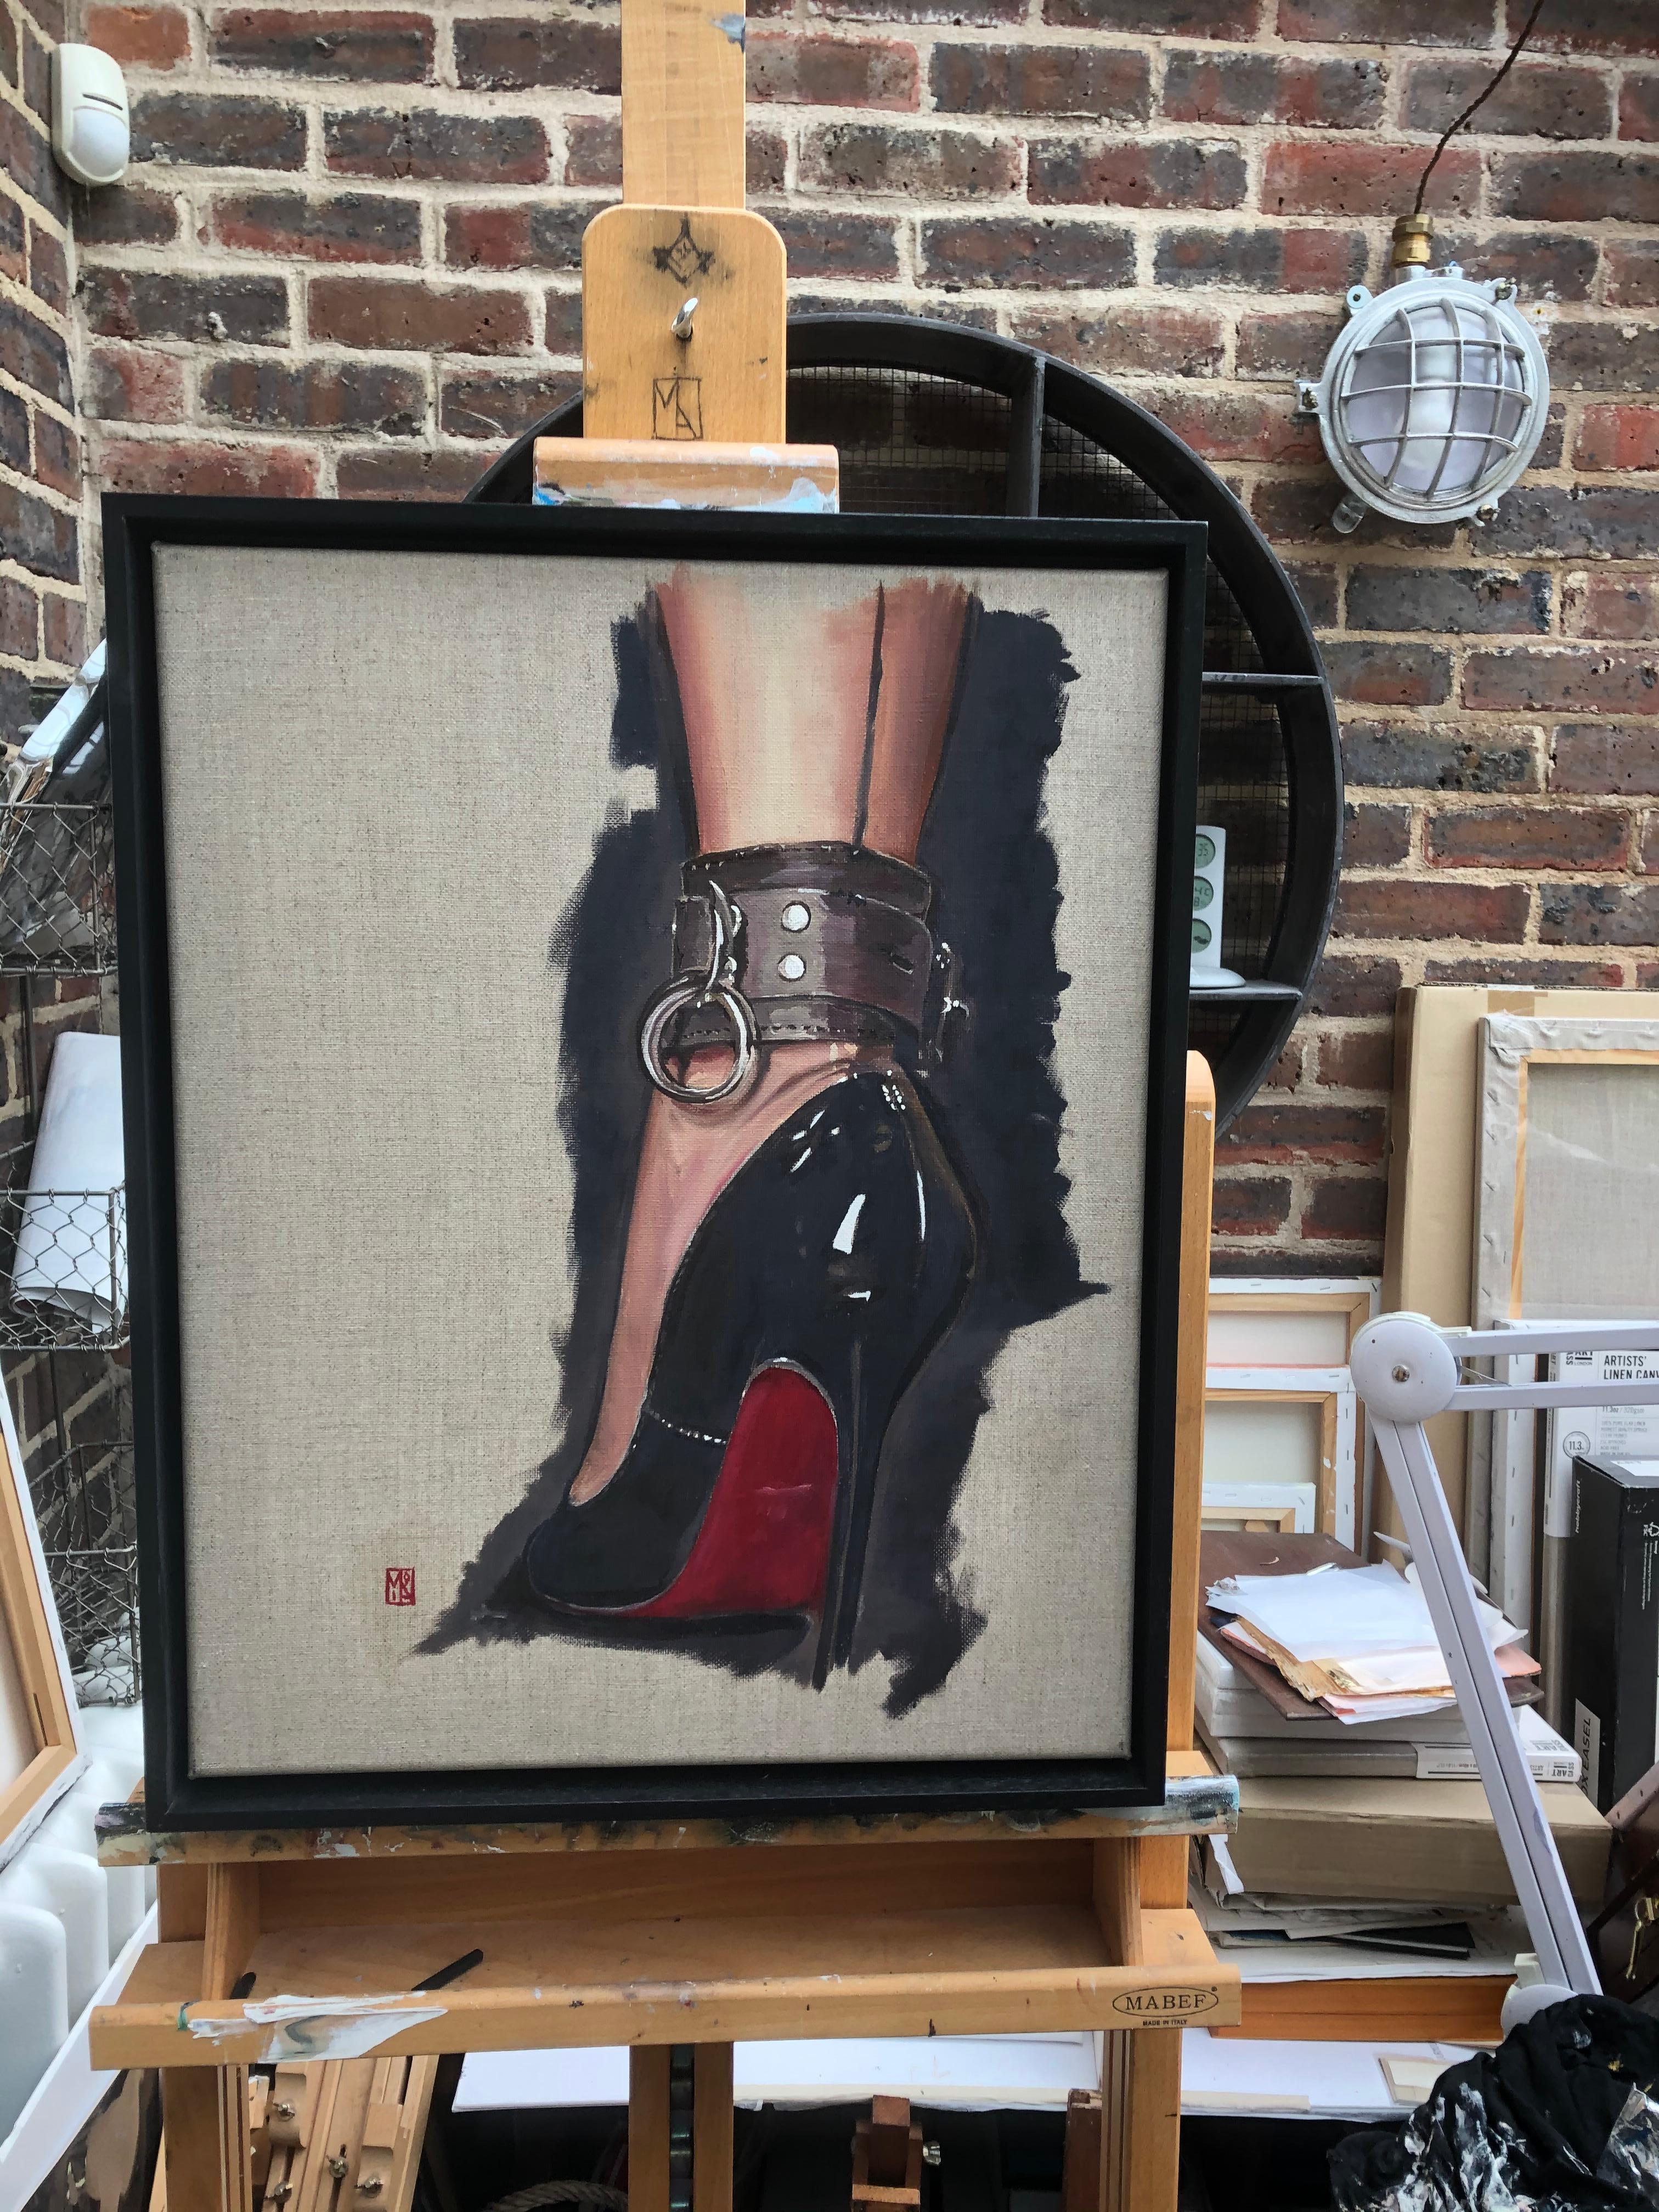 In These Shoes - Painting by Martin Allen